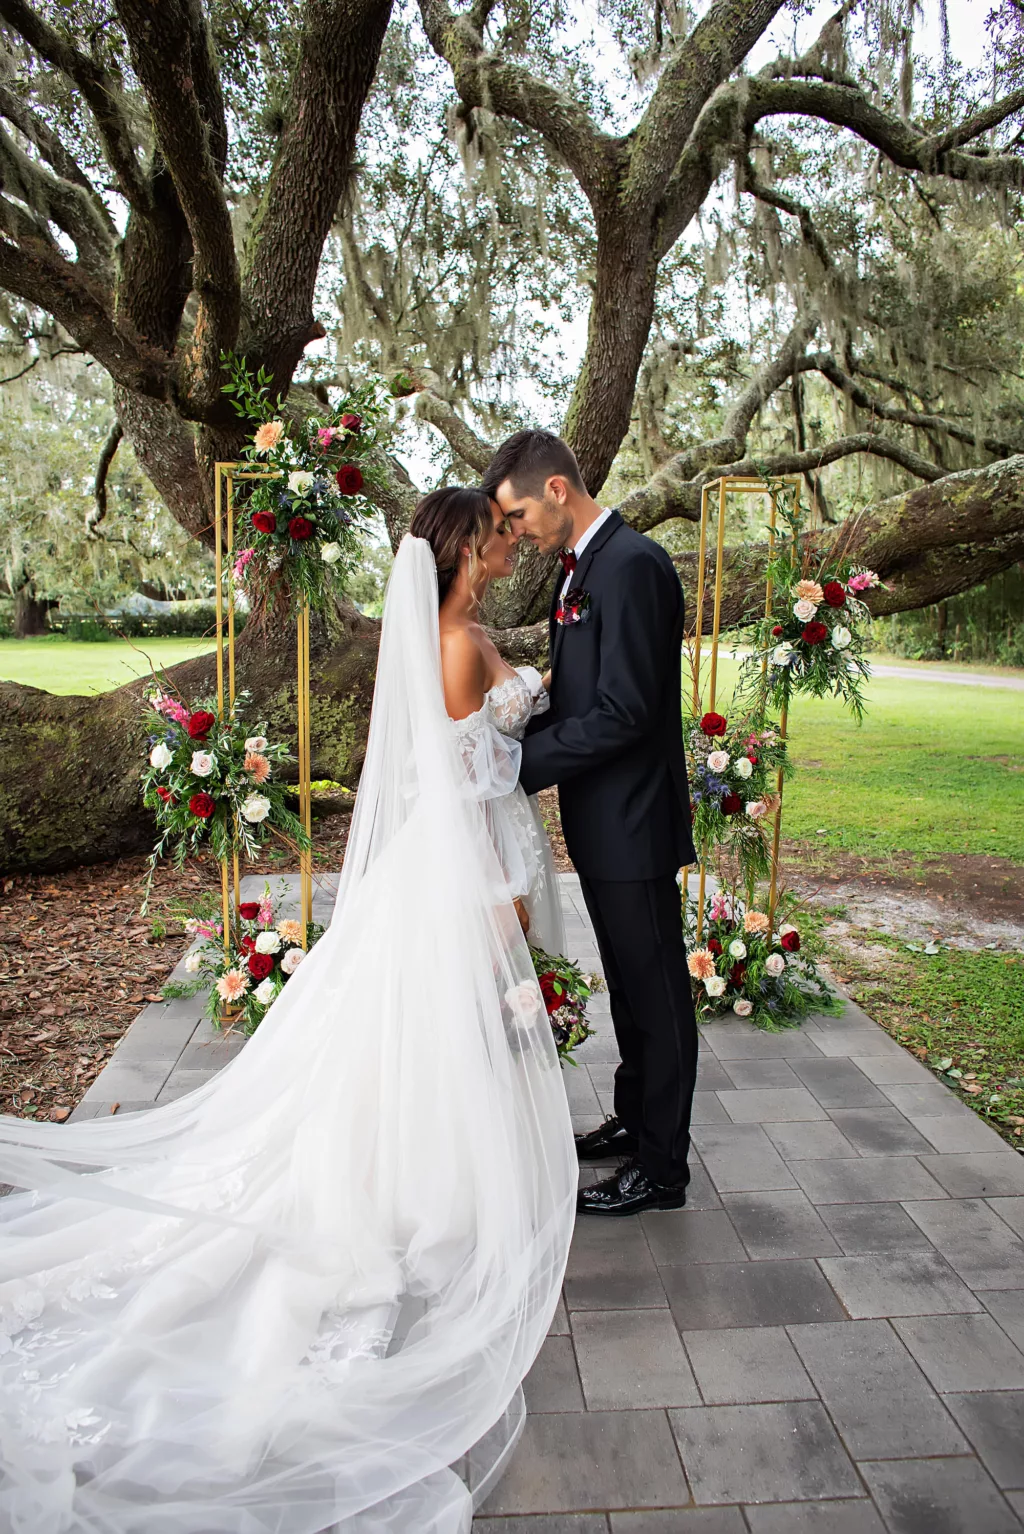 Gold Wedding Ceremony Tree Arch with Red Roses, Blue Thistle, Pink Roses, Peach Chrysanthemums, White Bacopa, and Greenery Decor Ideas | Tampa Bay Florist Save The Date Florida | Event Venue Legacy Lane Weddings | Brooksville Photographer Limelight Photography | Videographer Priceless Studios